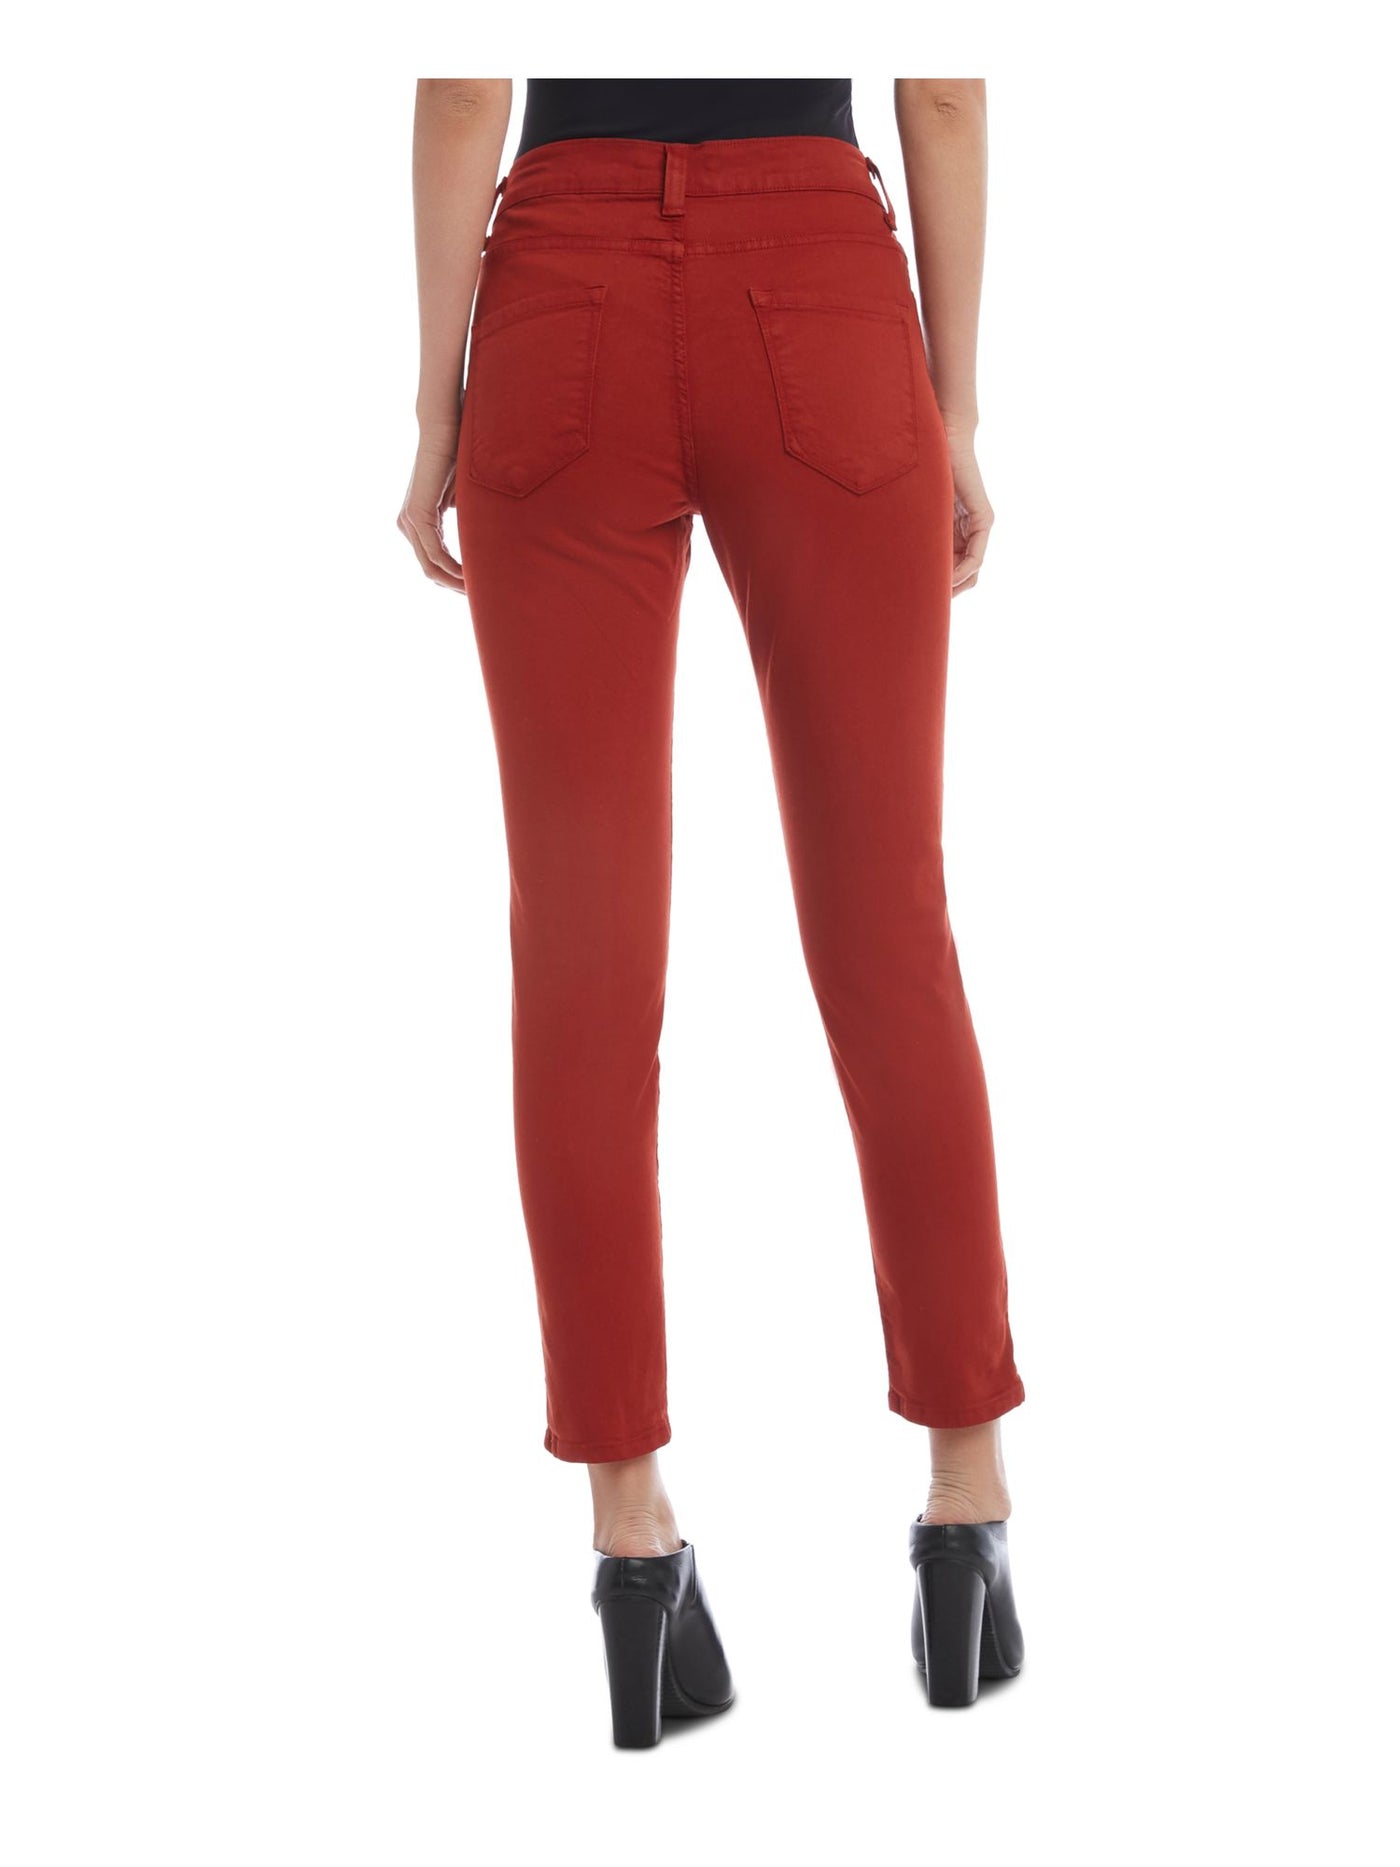 KAREN KANE Womens Red Stretch Zippered Pocketed Cropped Ankle Skinny Jeans 6